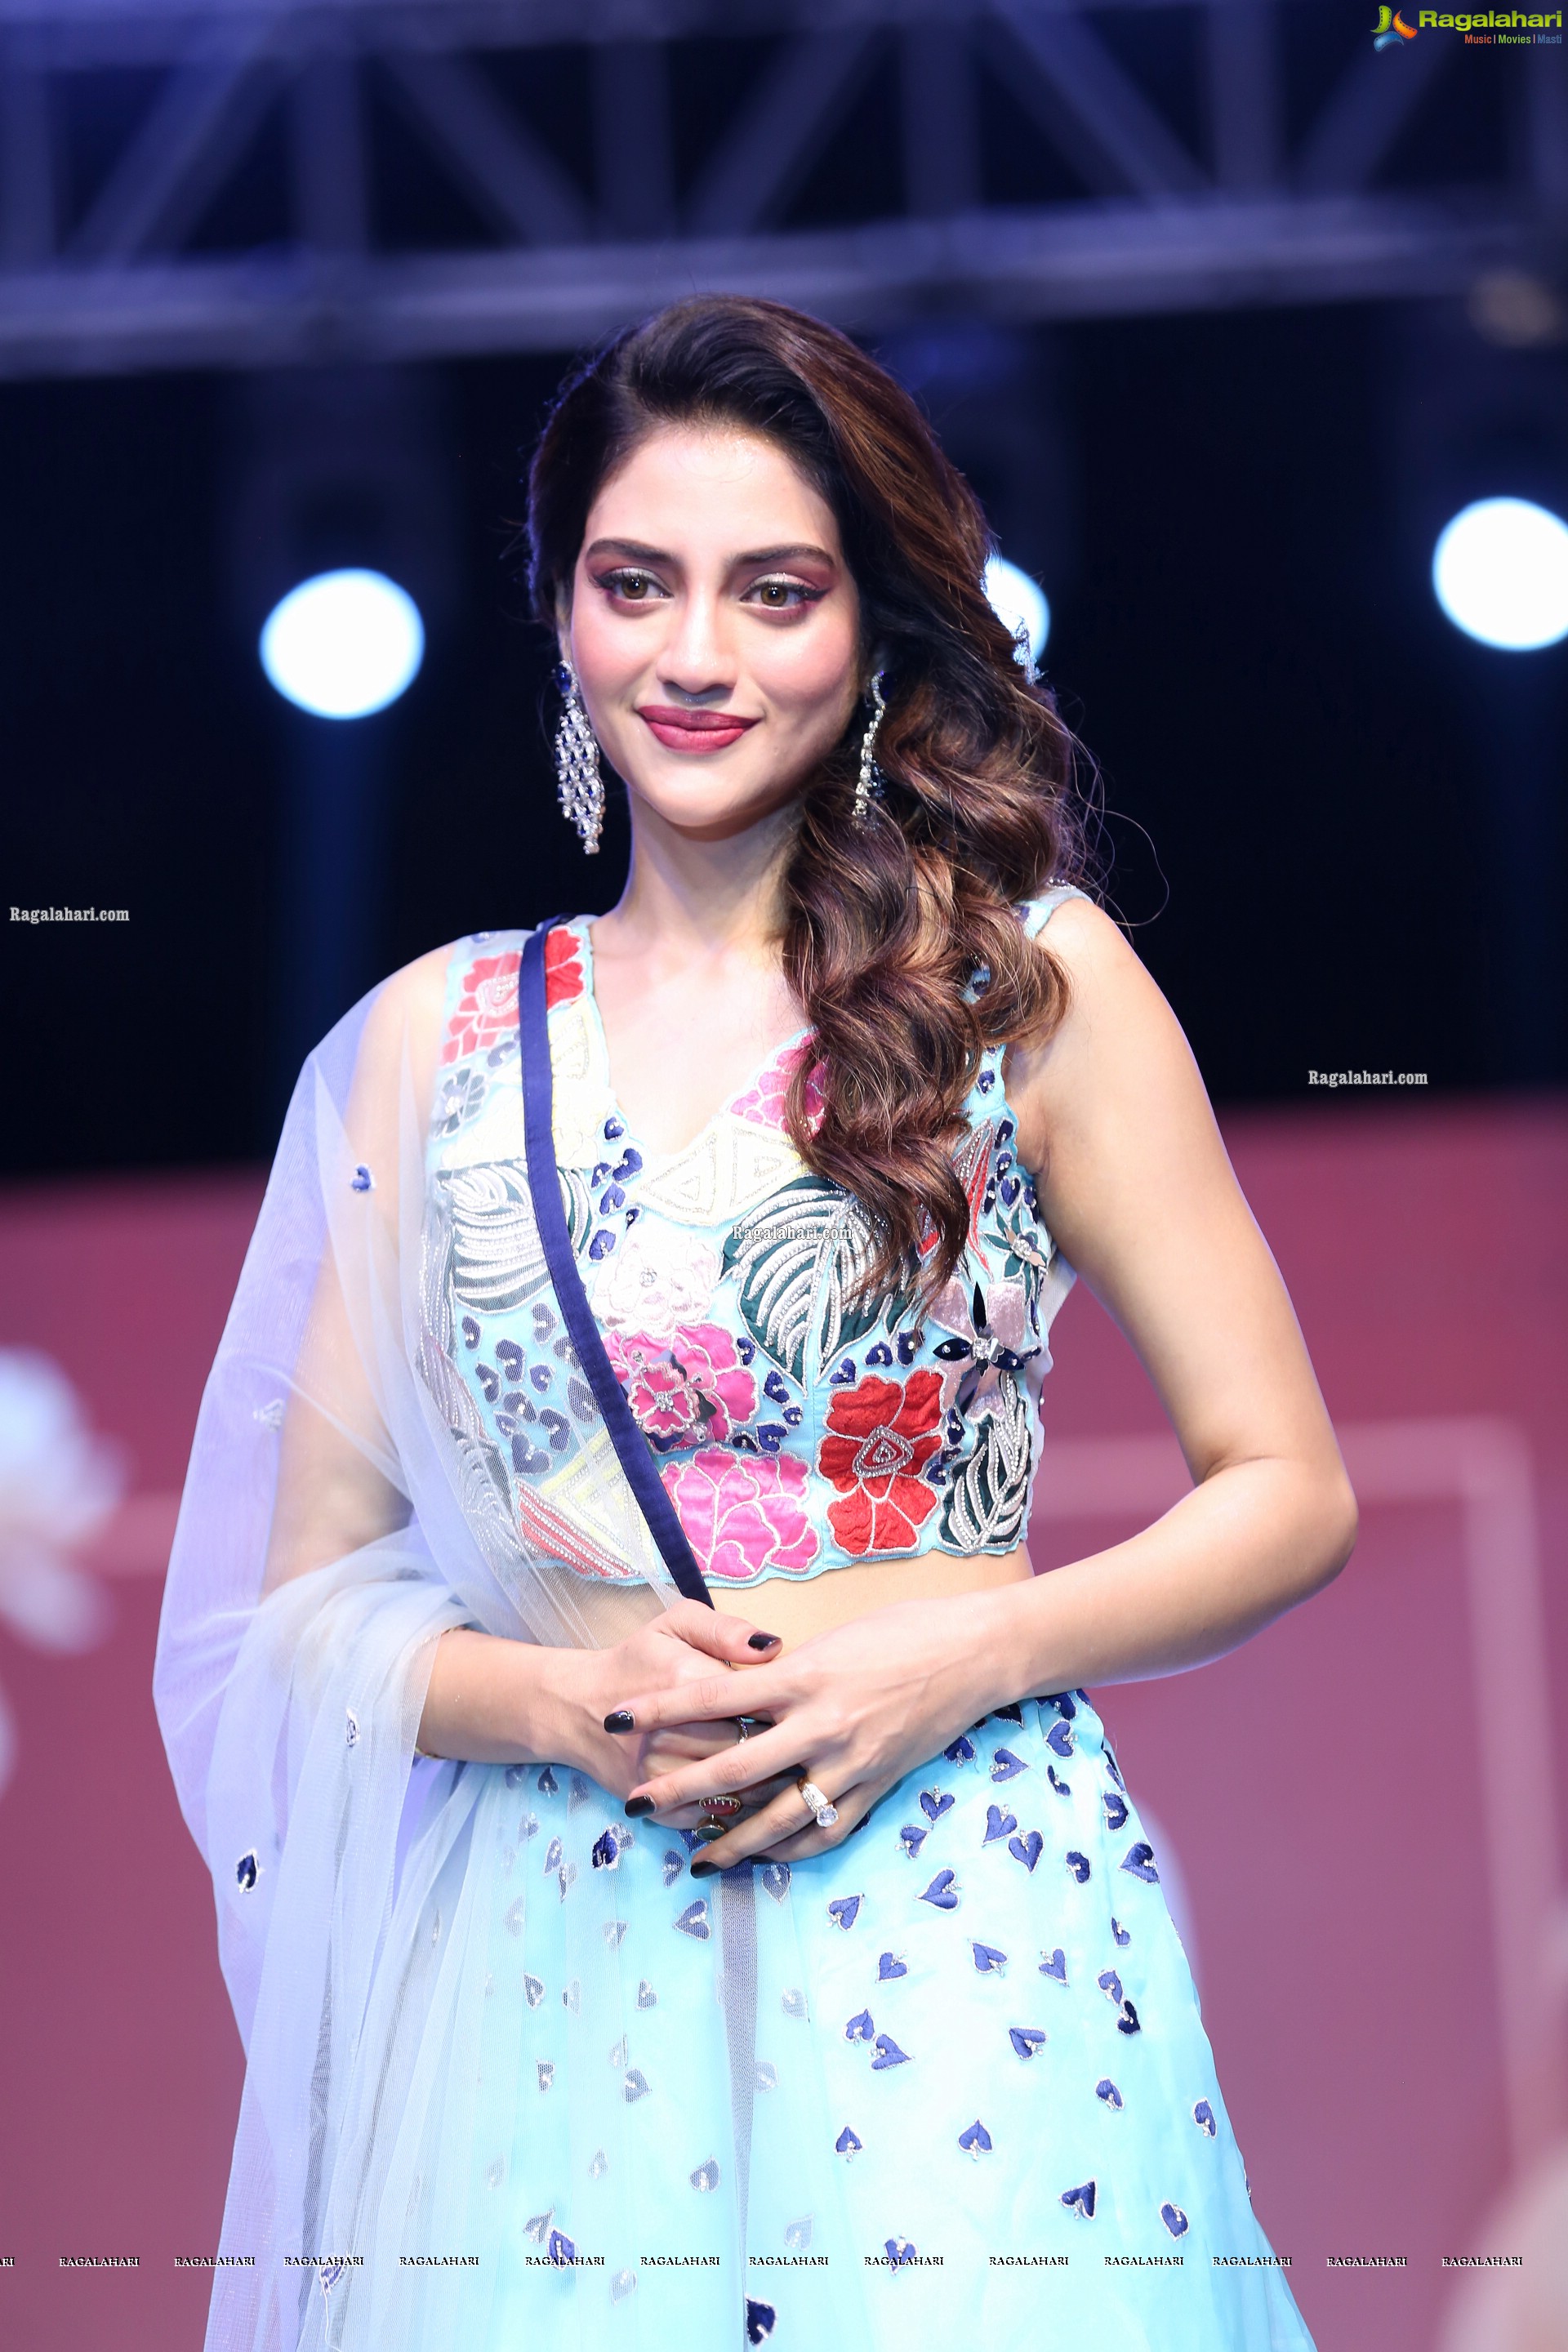 Nusrat Jahan Youve Launch at Rangoli and Fashion Show - HD Gallery